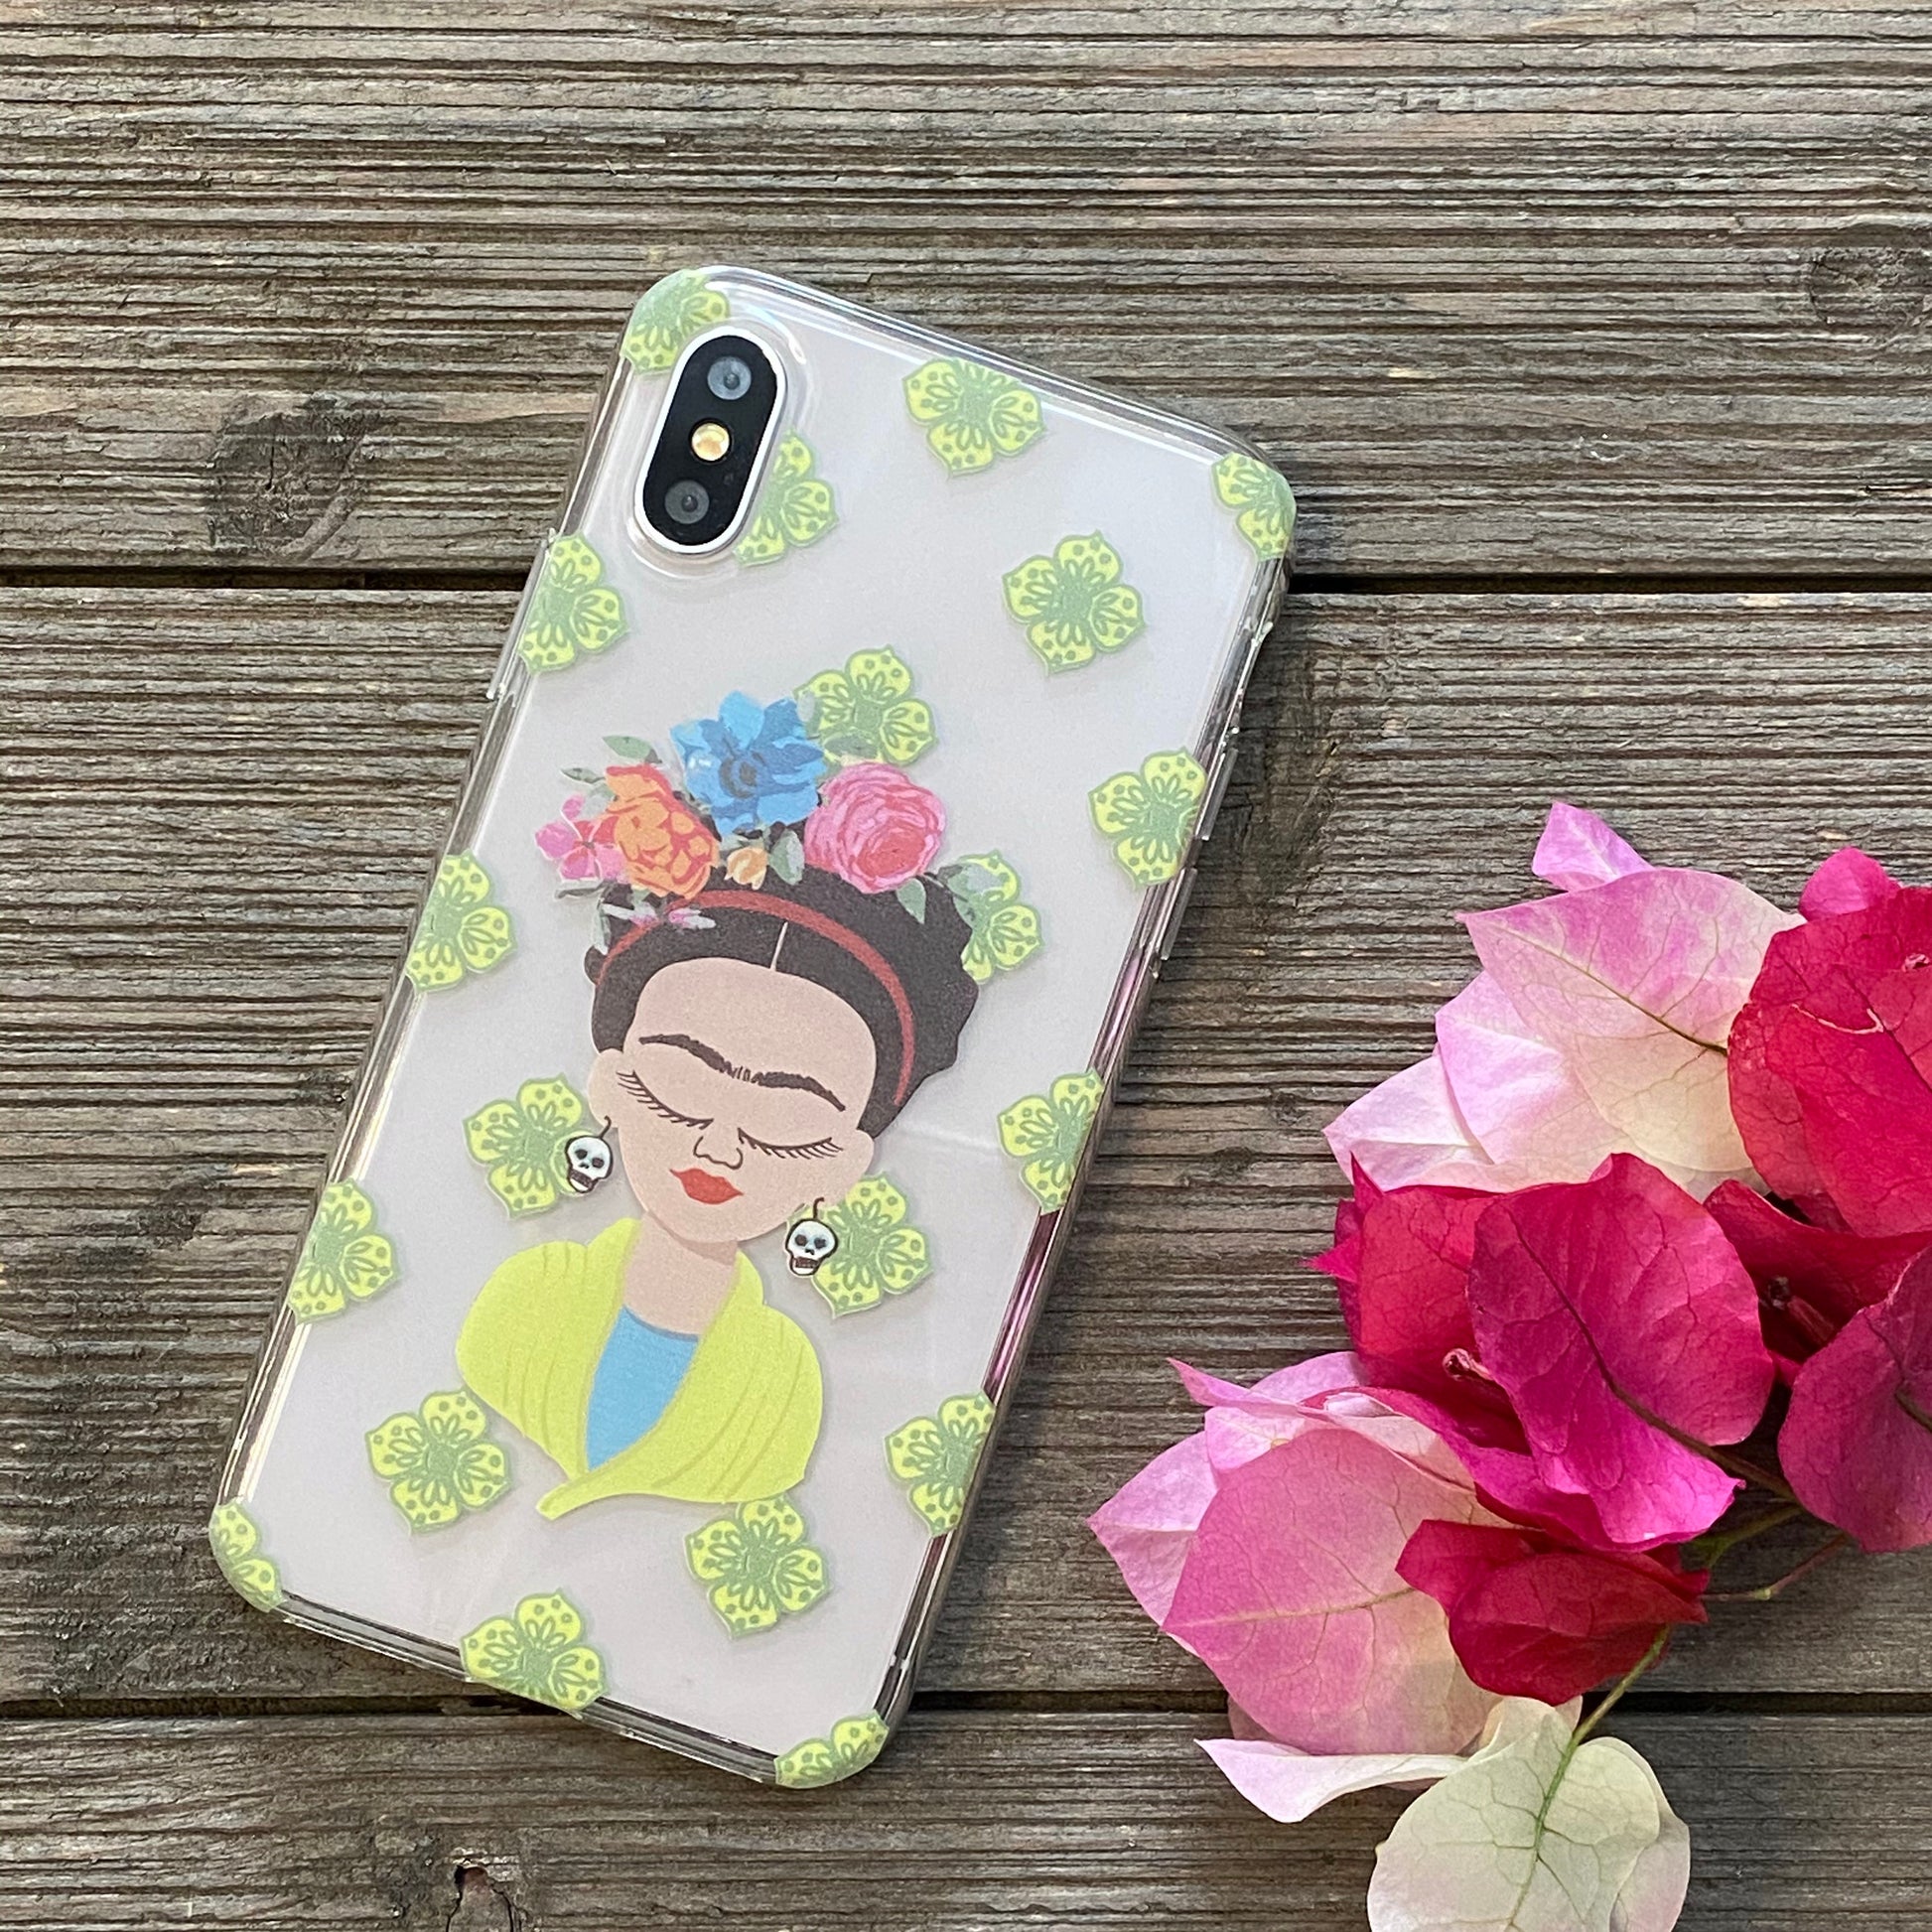 mexican artist kahlo iphone case